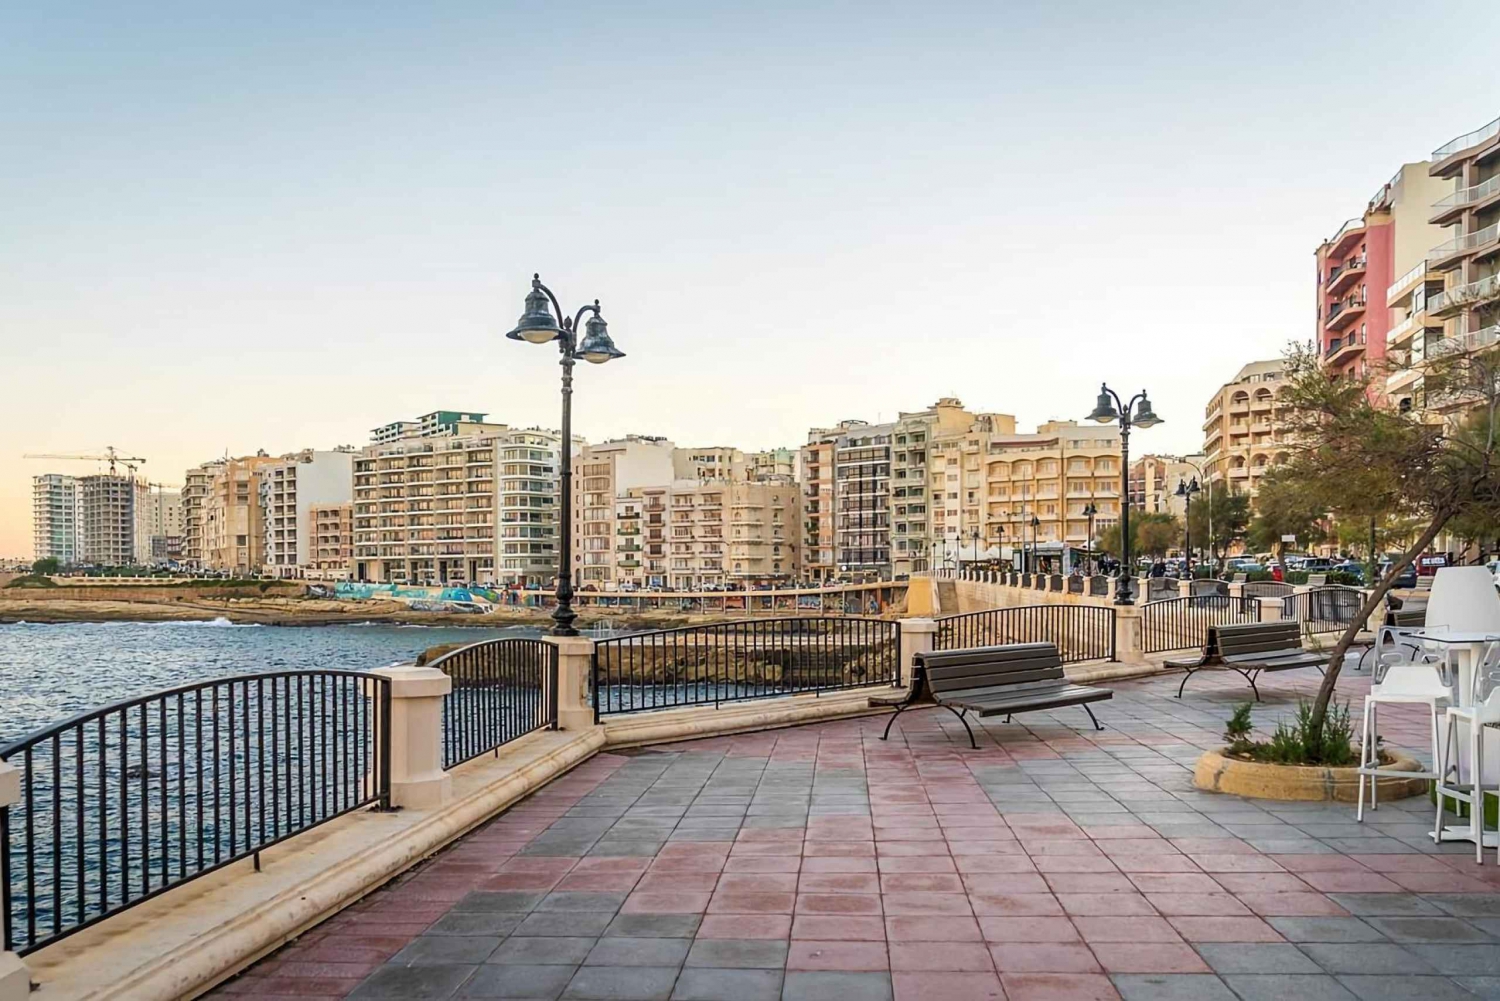 Sliema: Harbour Cruise and Shopping in Sliema Afternoon Tour